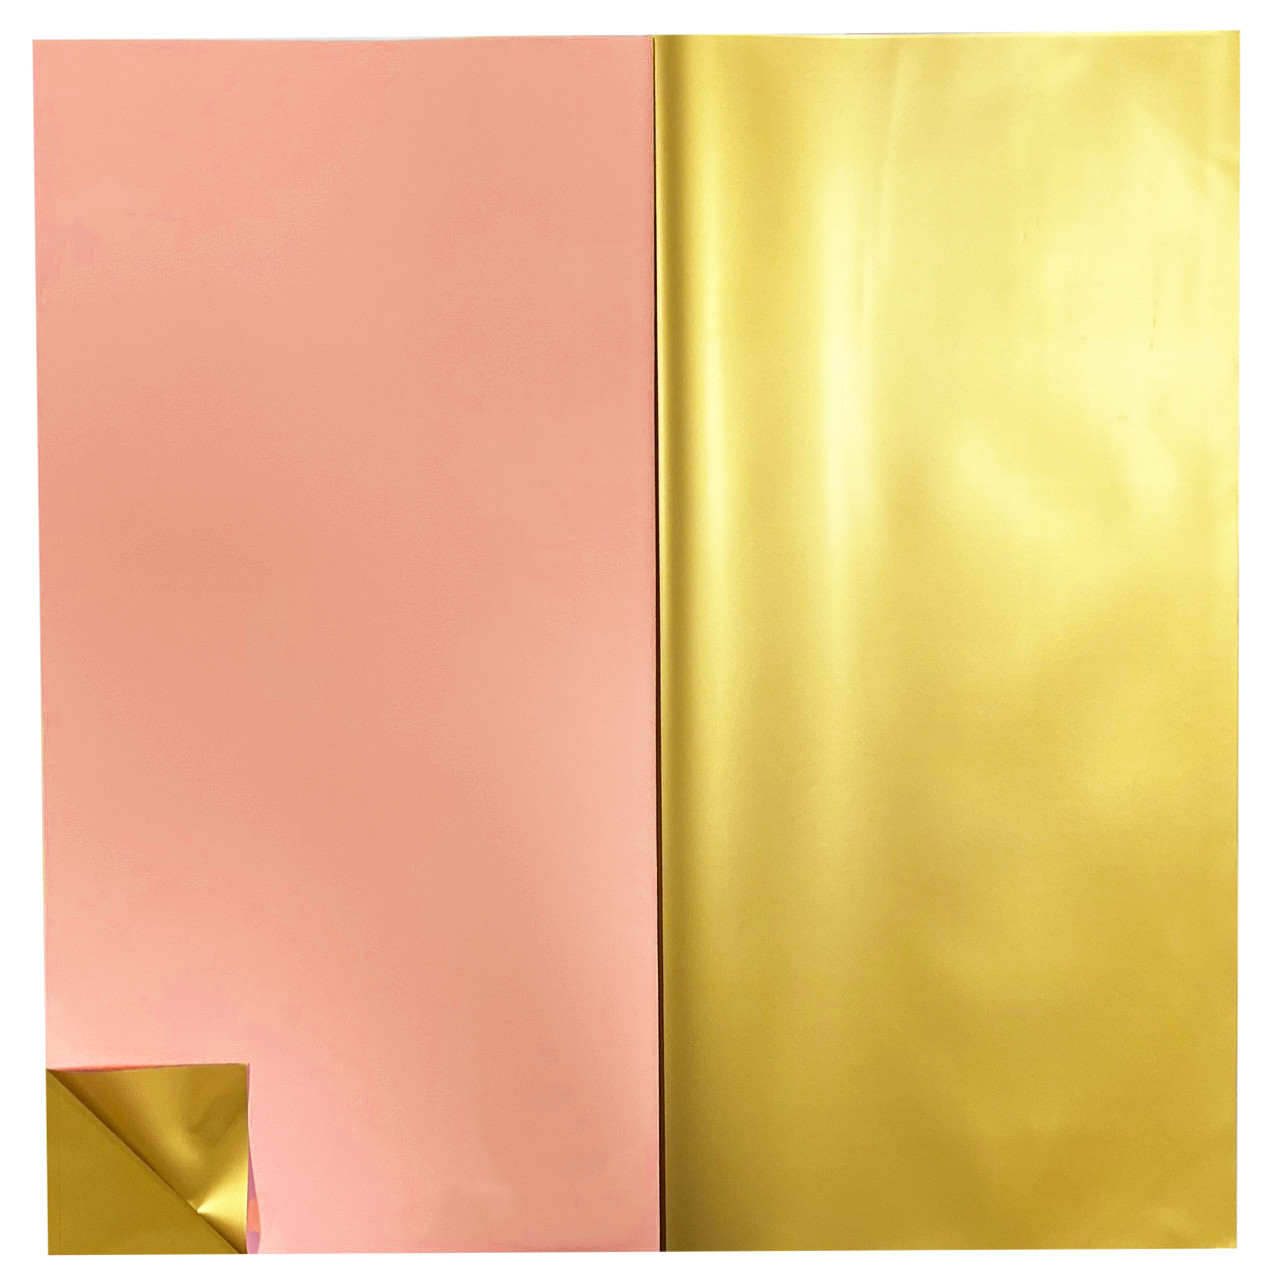 Double Sided Color Flower Wrapping Paper Light Pink+Gold 22.8x22.8  Waterproof 10 Pack 